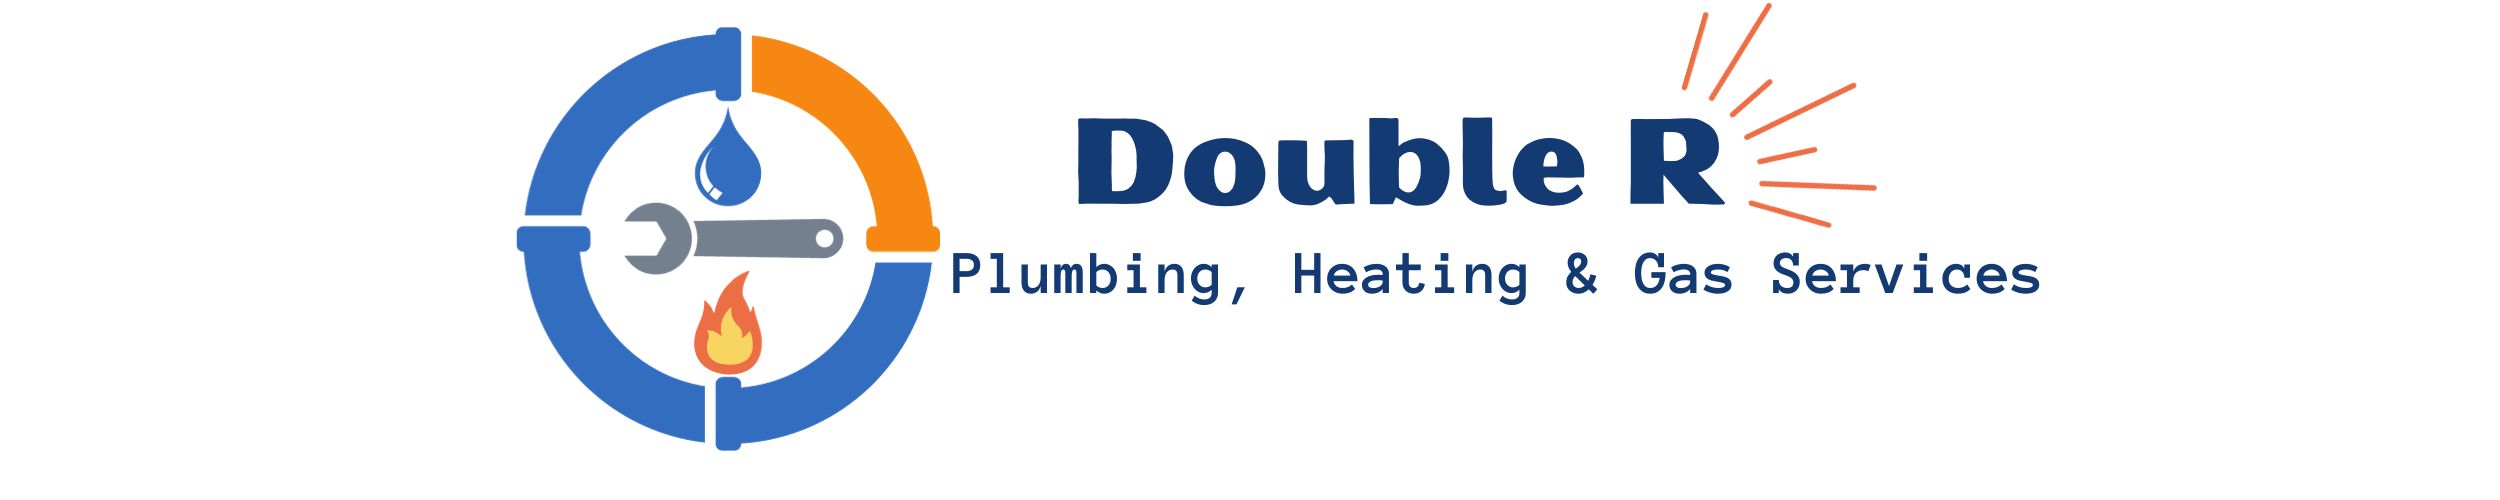 Double R Plumbing, Heating & Gas Services